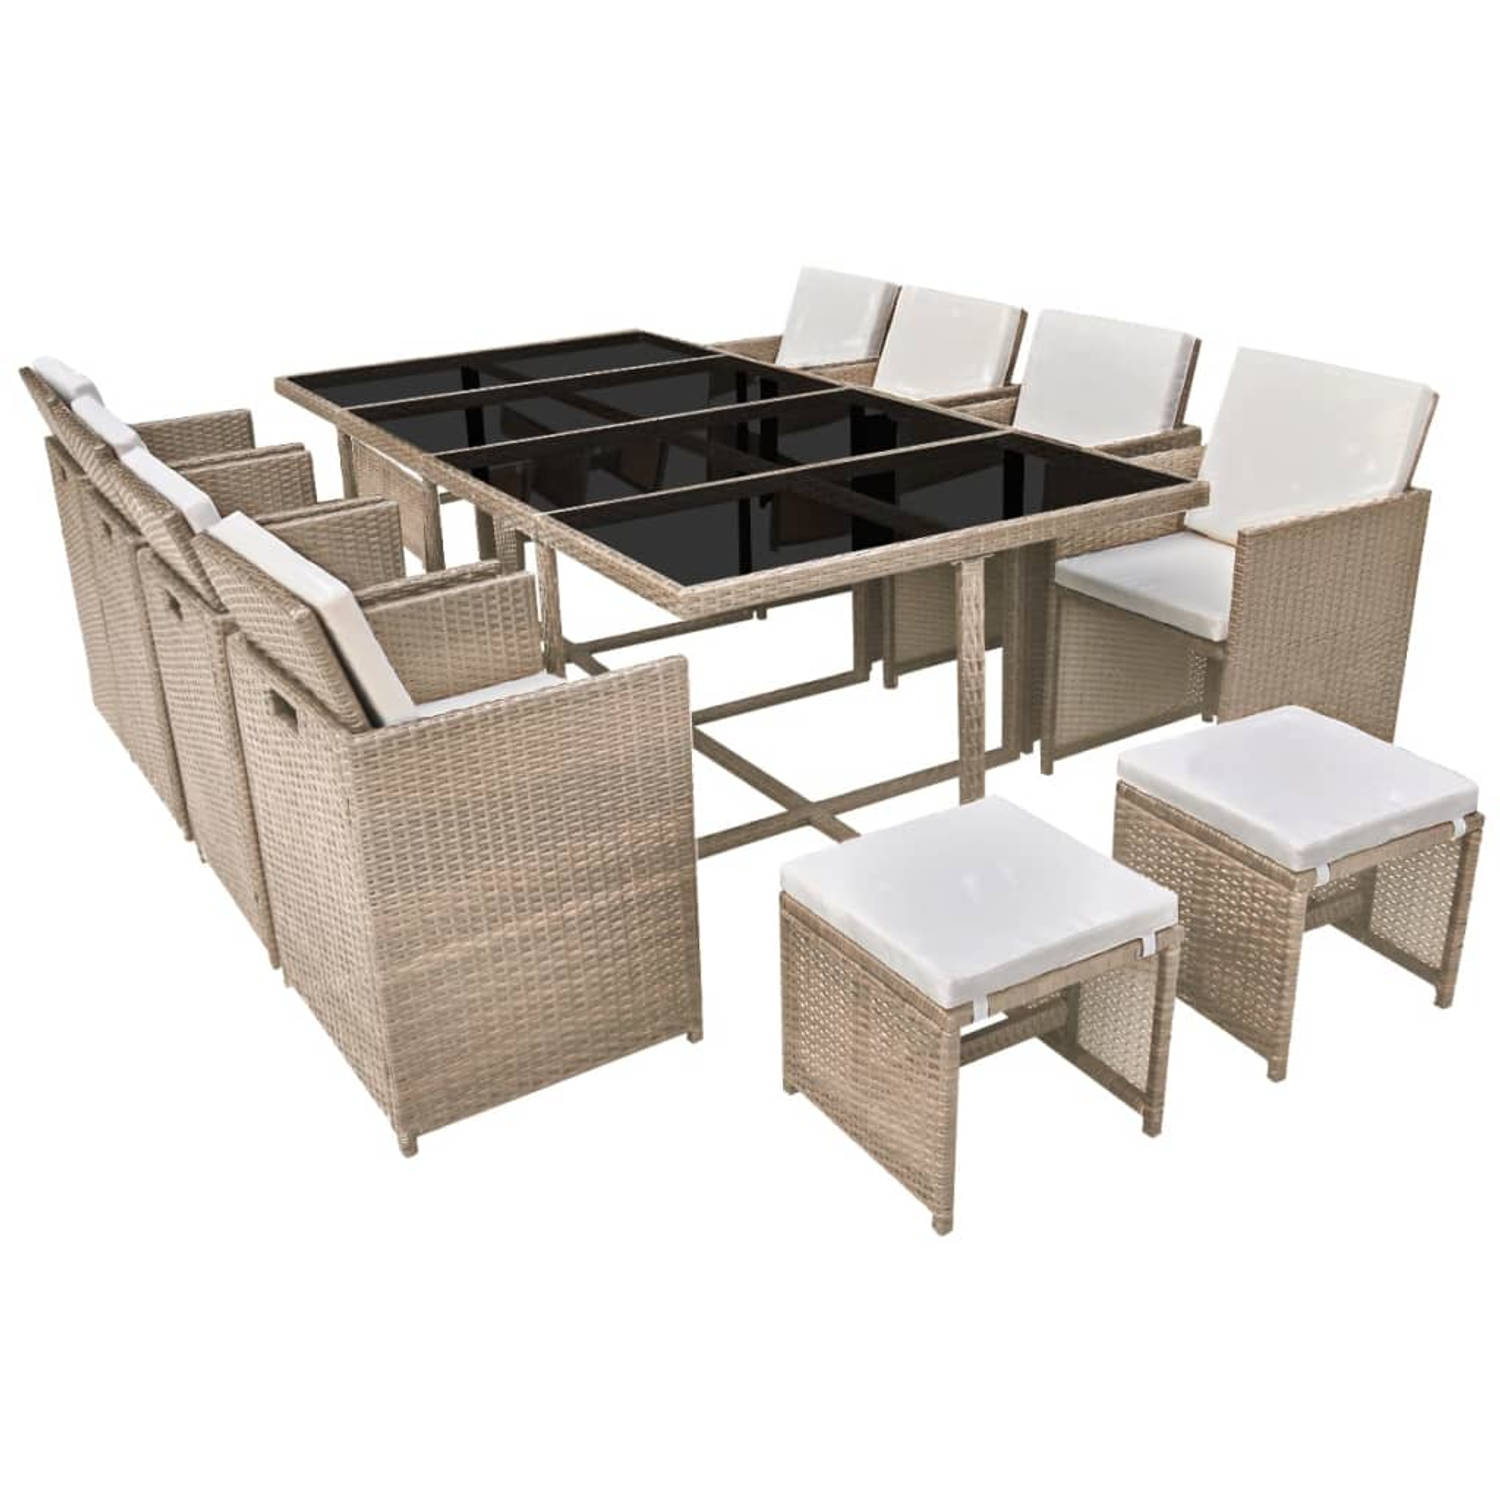 The Living Store-13-delige-Tuinset-met-kussens-poly-rattan-beige - Tuinset